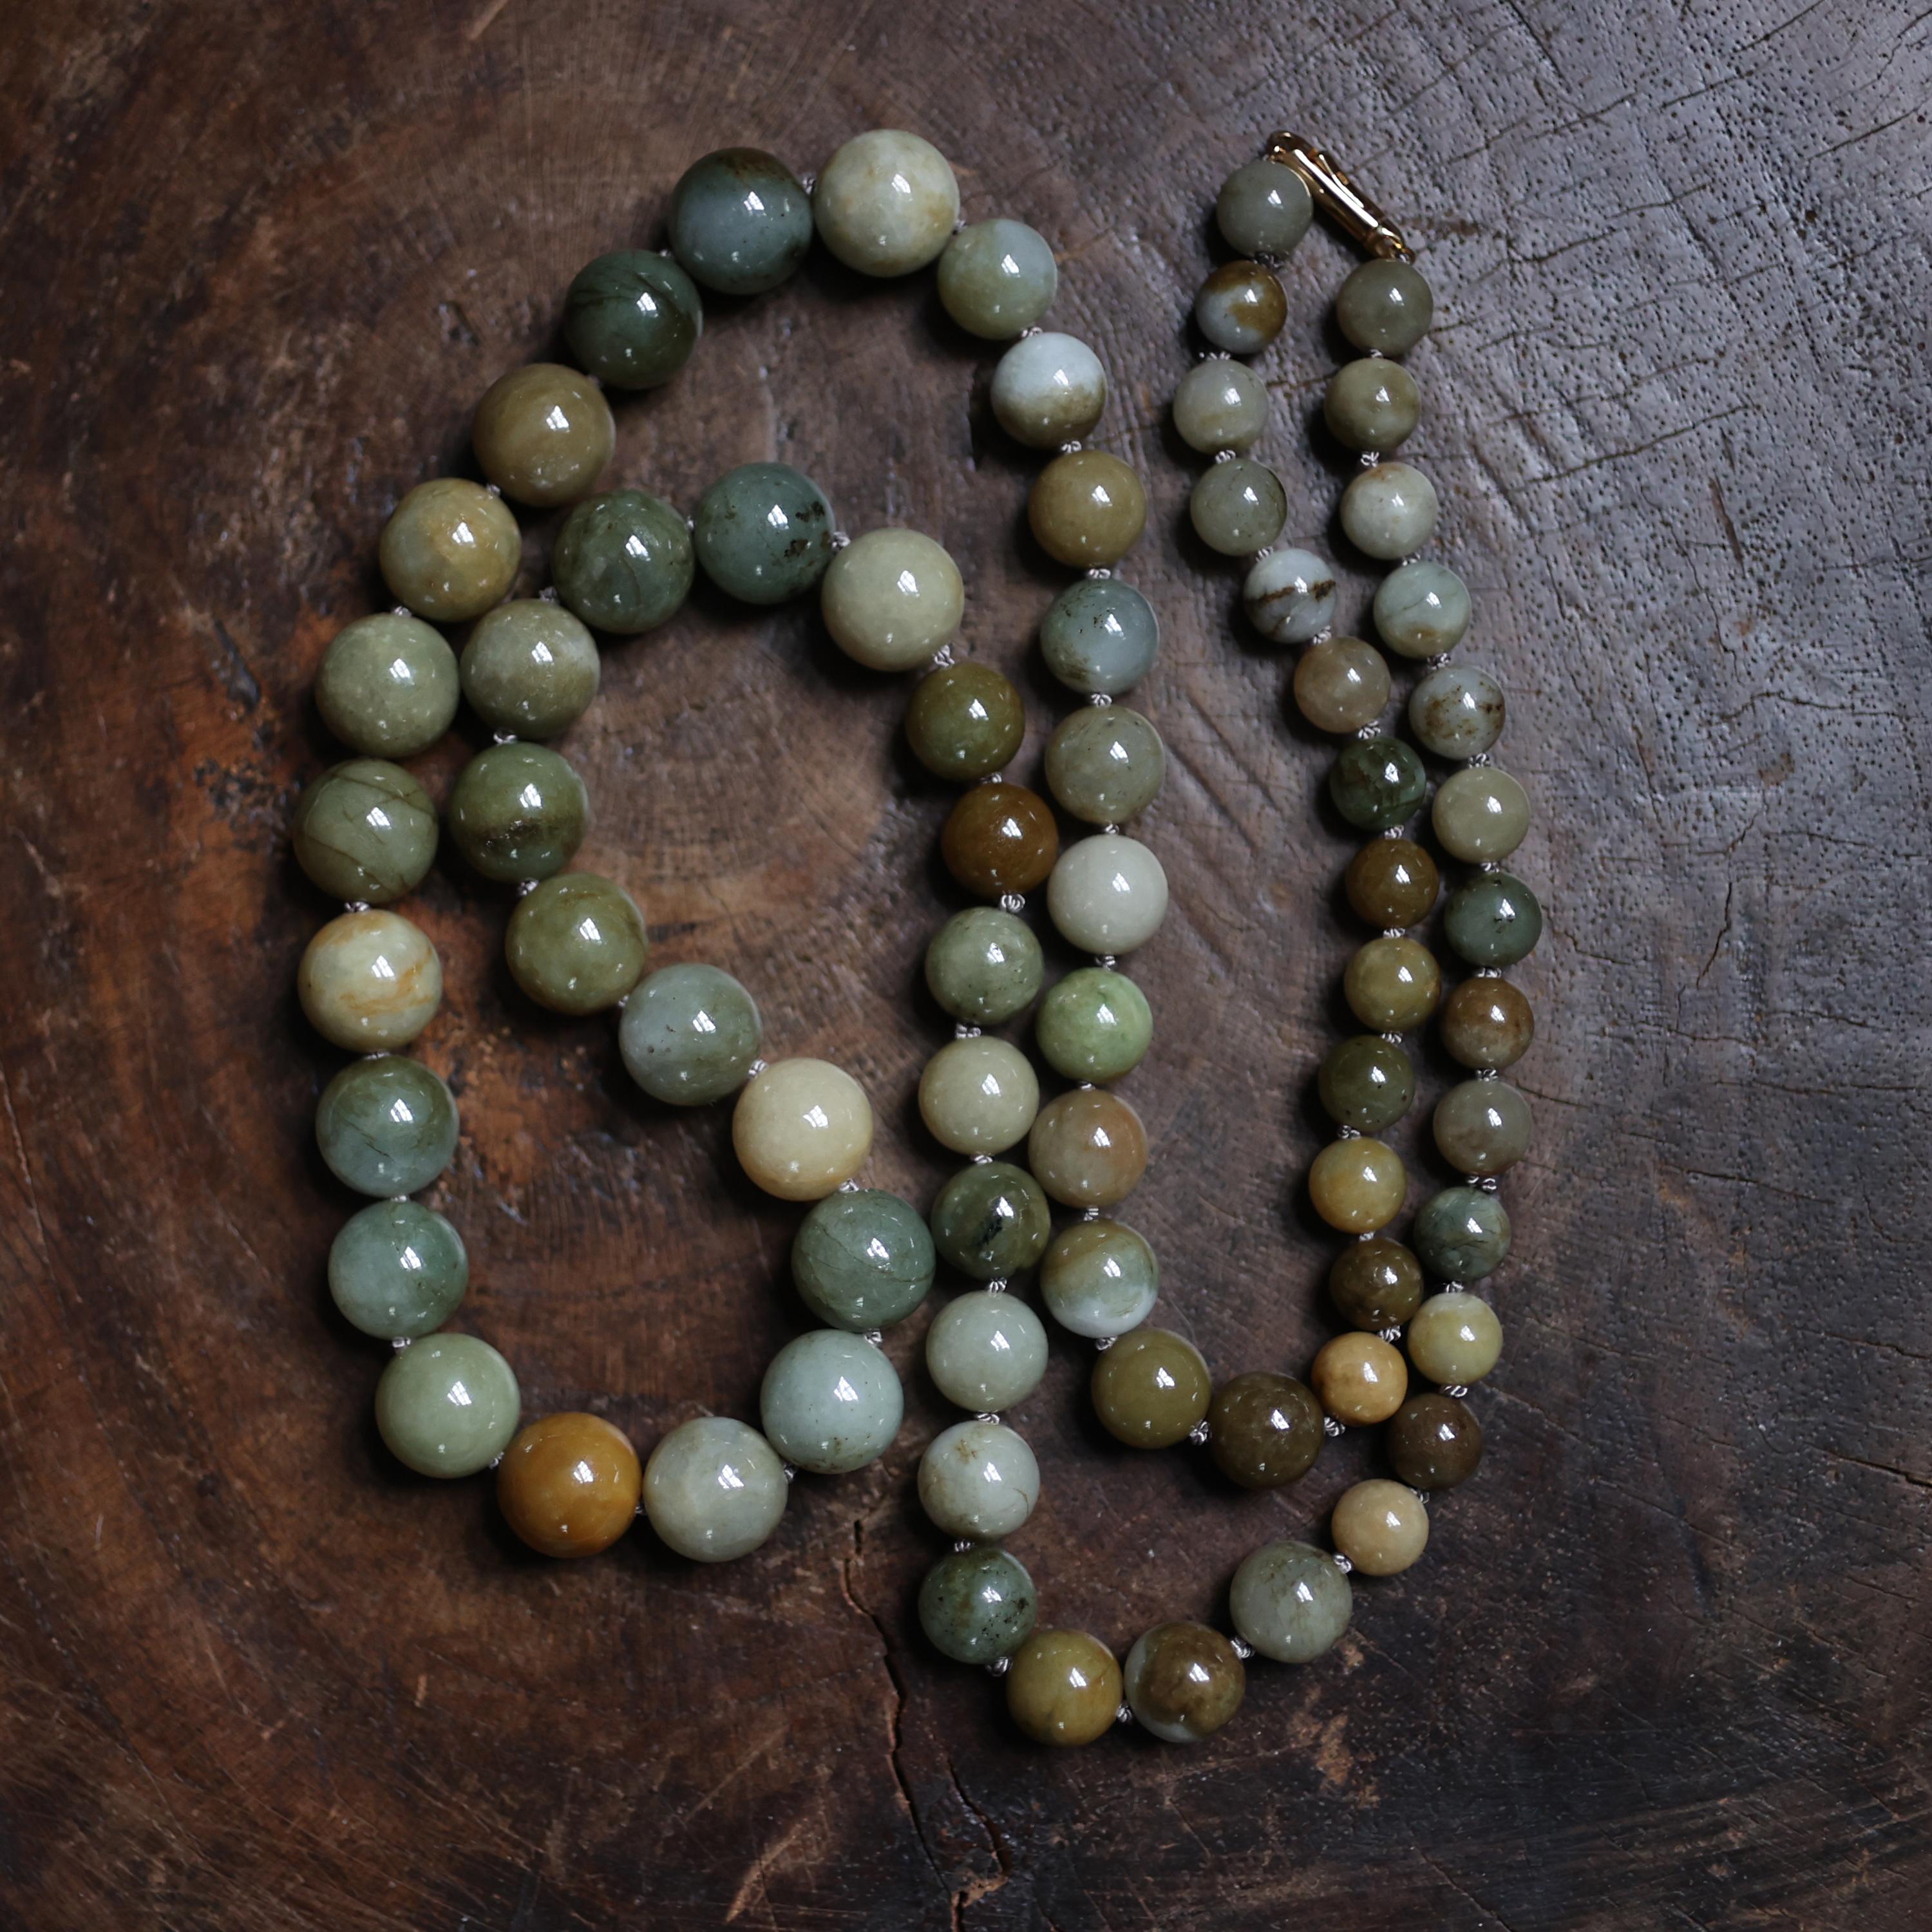 Jade Necklace Late Autumn Coloring Certified Untreated 1